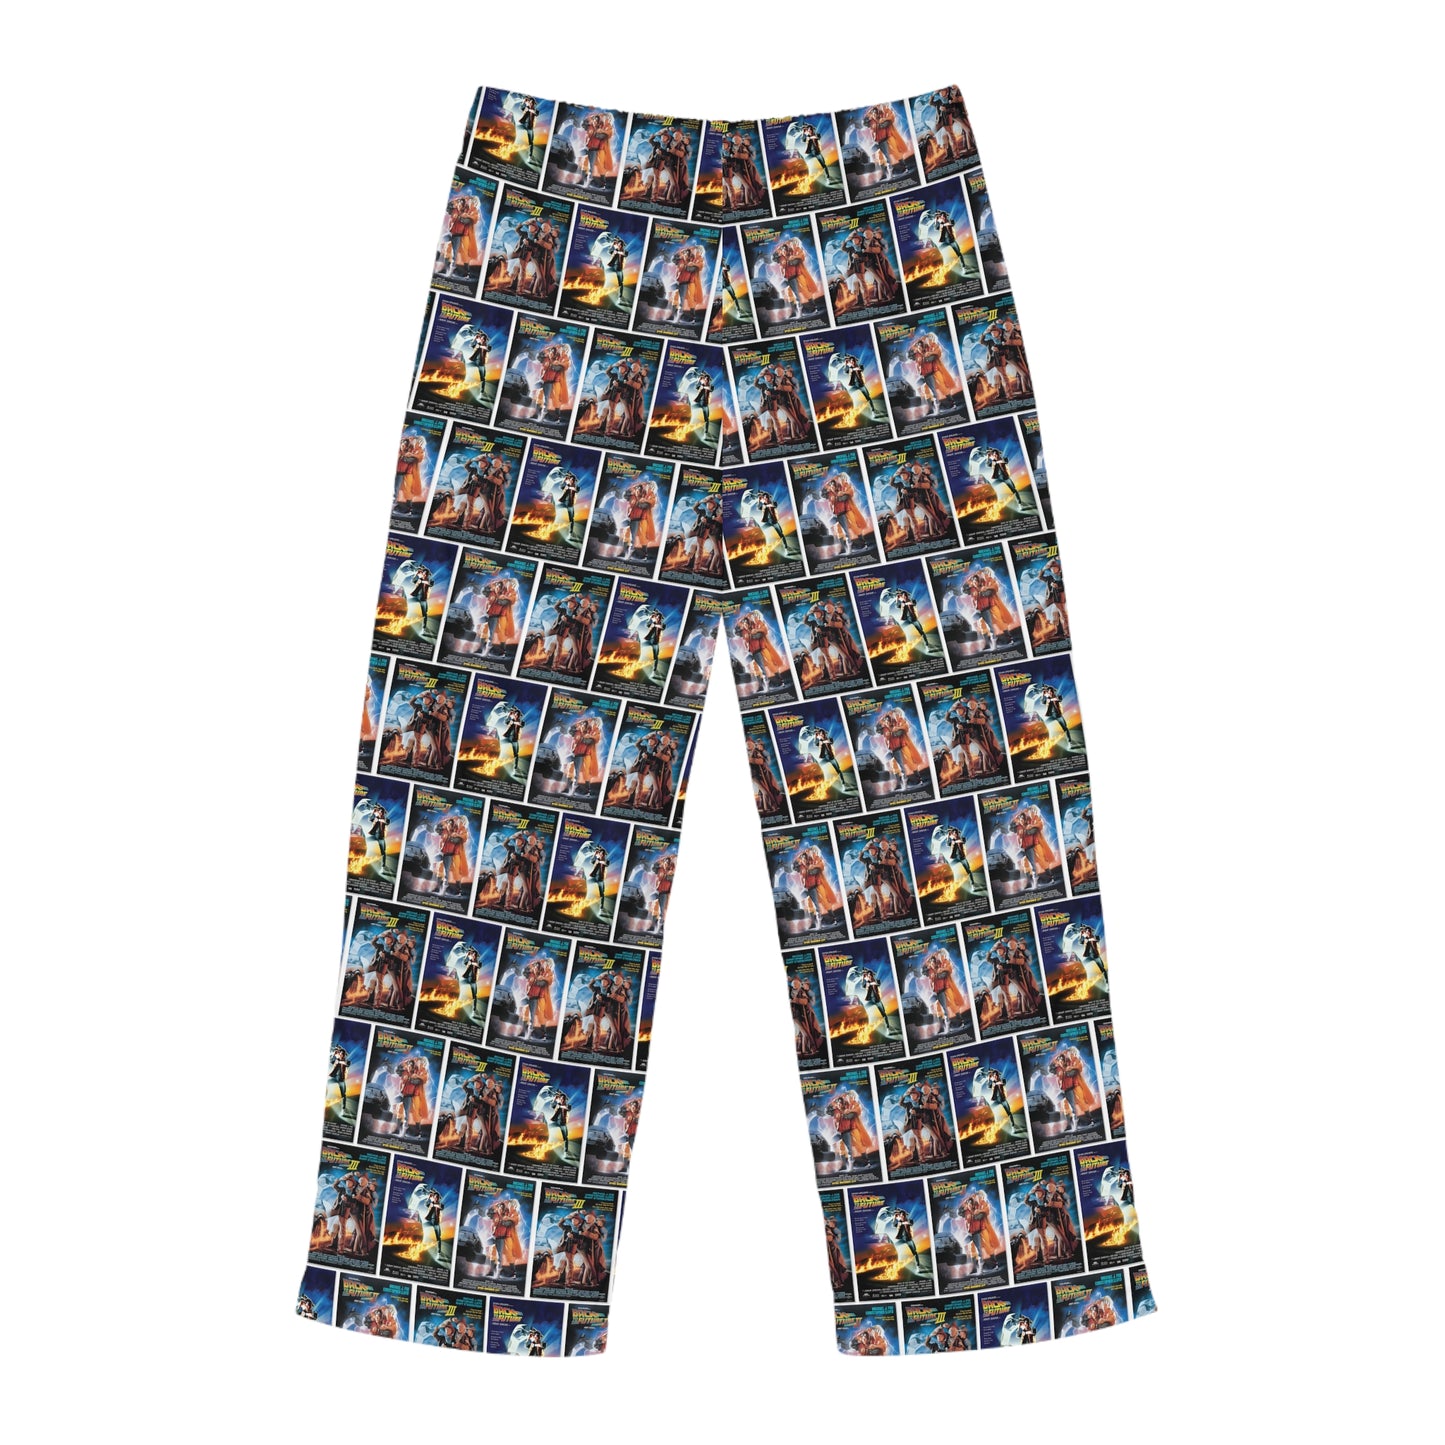 Back To The Future Movie Posters Collage Men's Pajama Pants